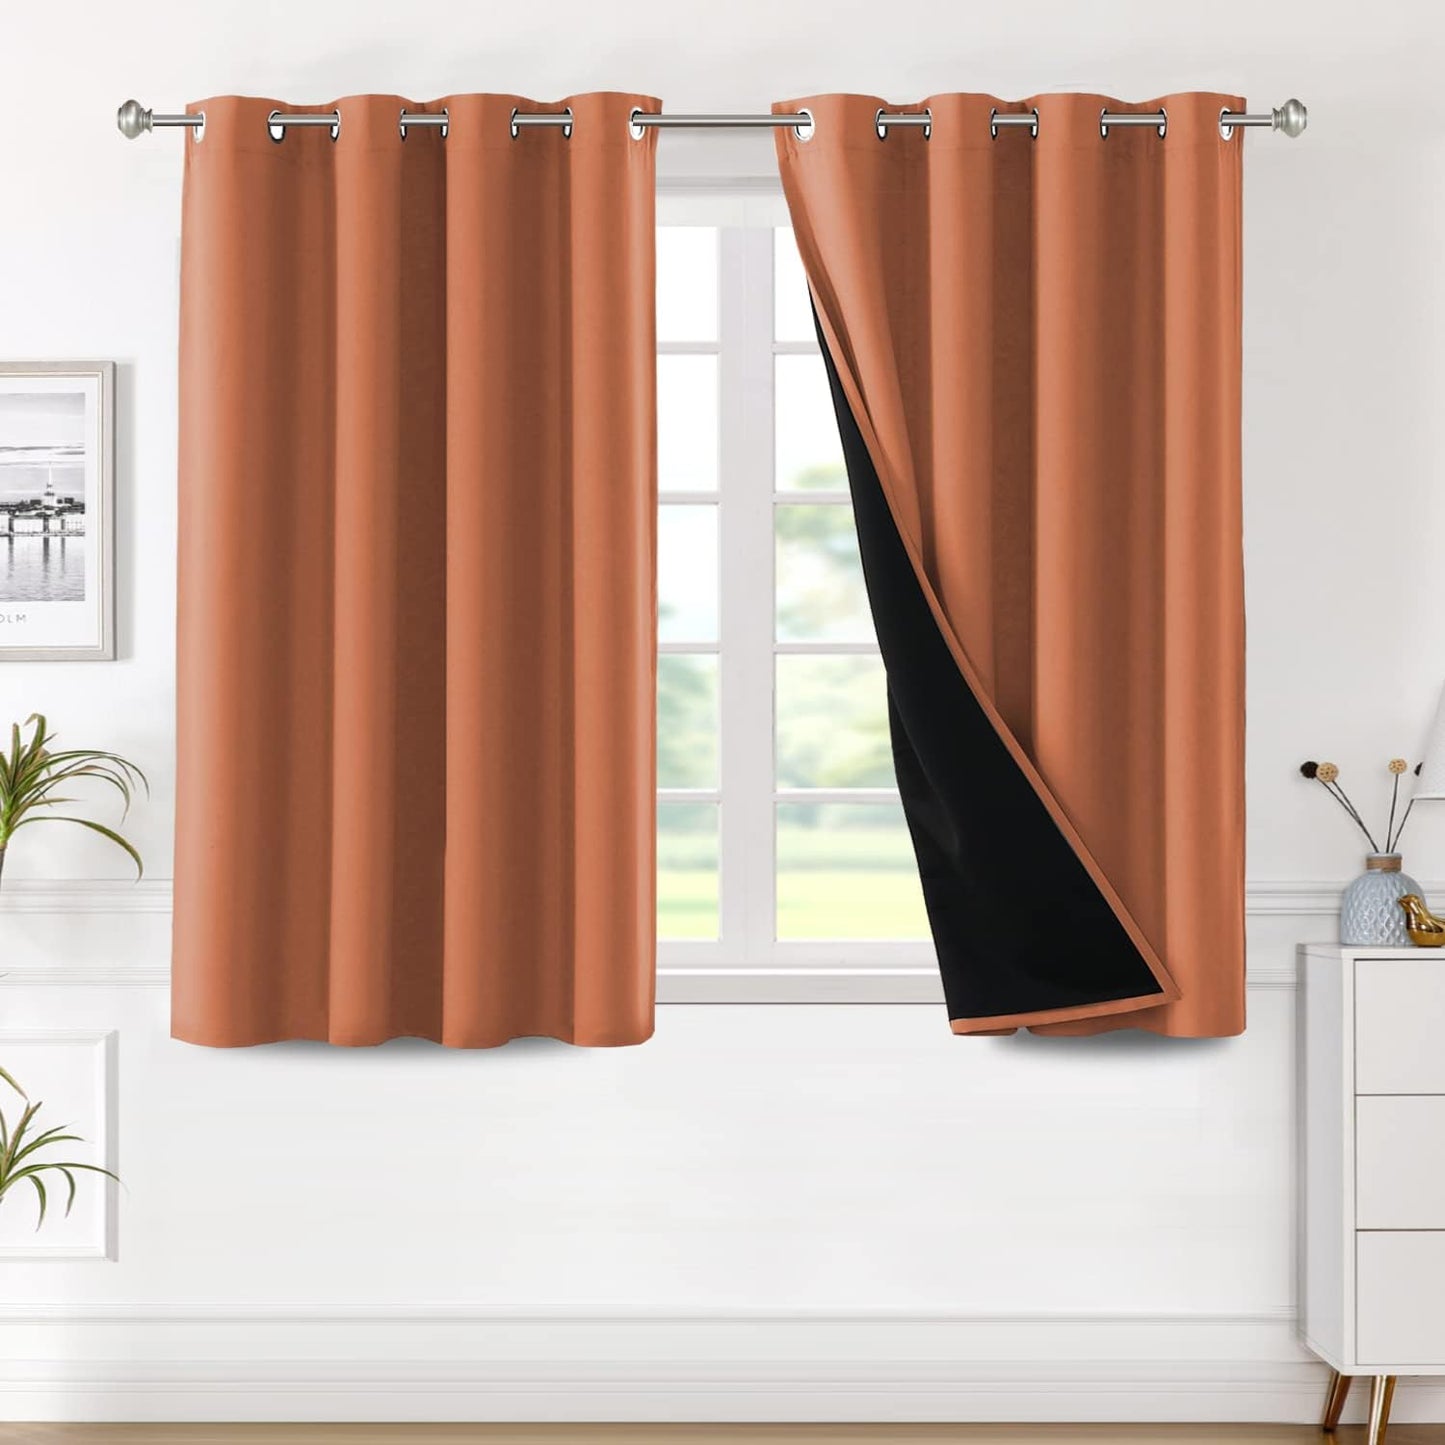 H.VERSAILTEX Blackout Curtains with Liner Backing, Thermal Insulated Curtains for Living Room, Noise Reducing Drapes, White, 52 Inches Wide X 96 Inches Long per Panel, Set of 2 Panels  H.VERSAILTEX Burnt Orange 52"W X 45"L 